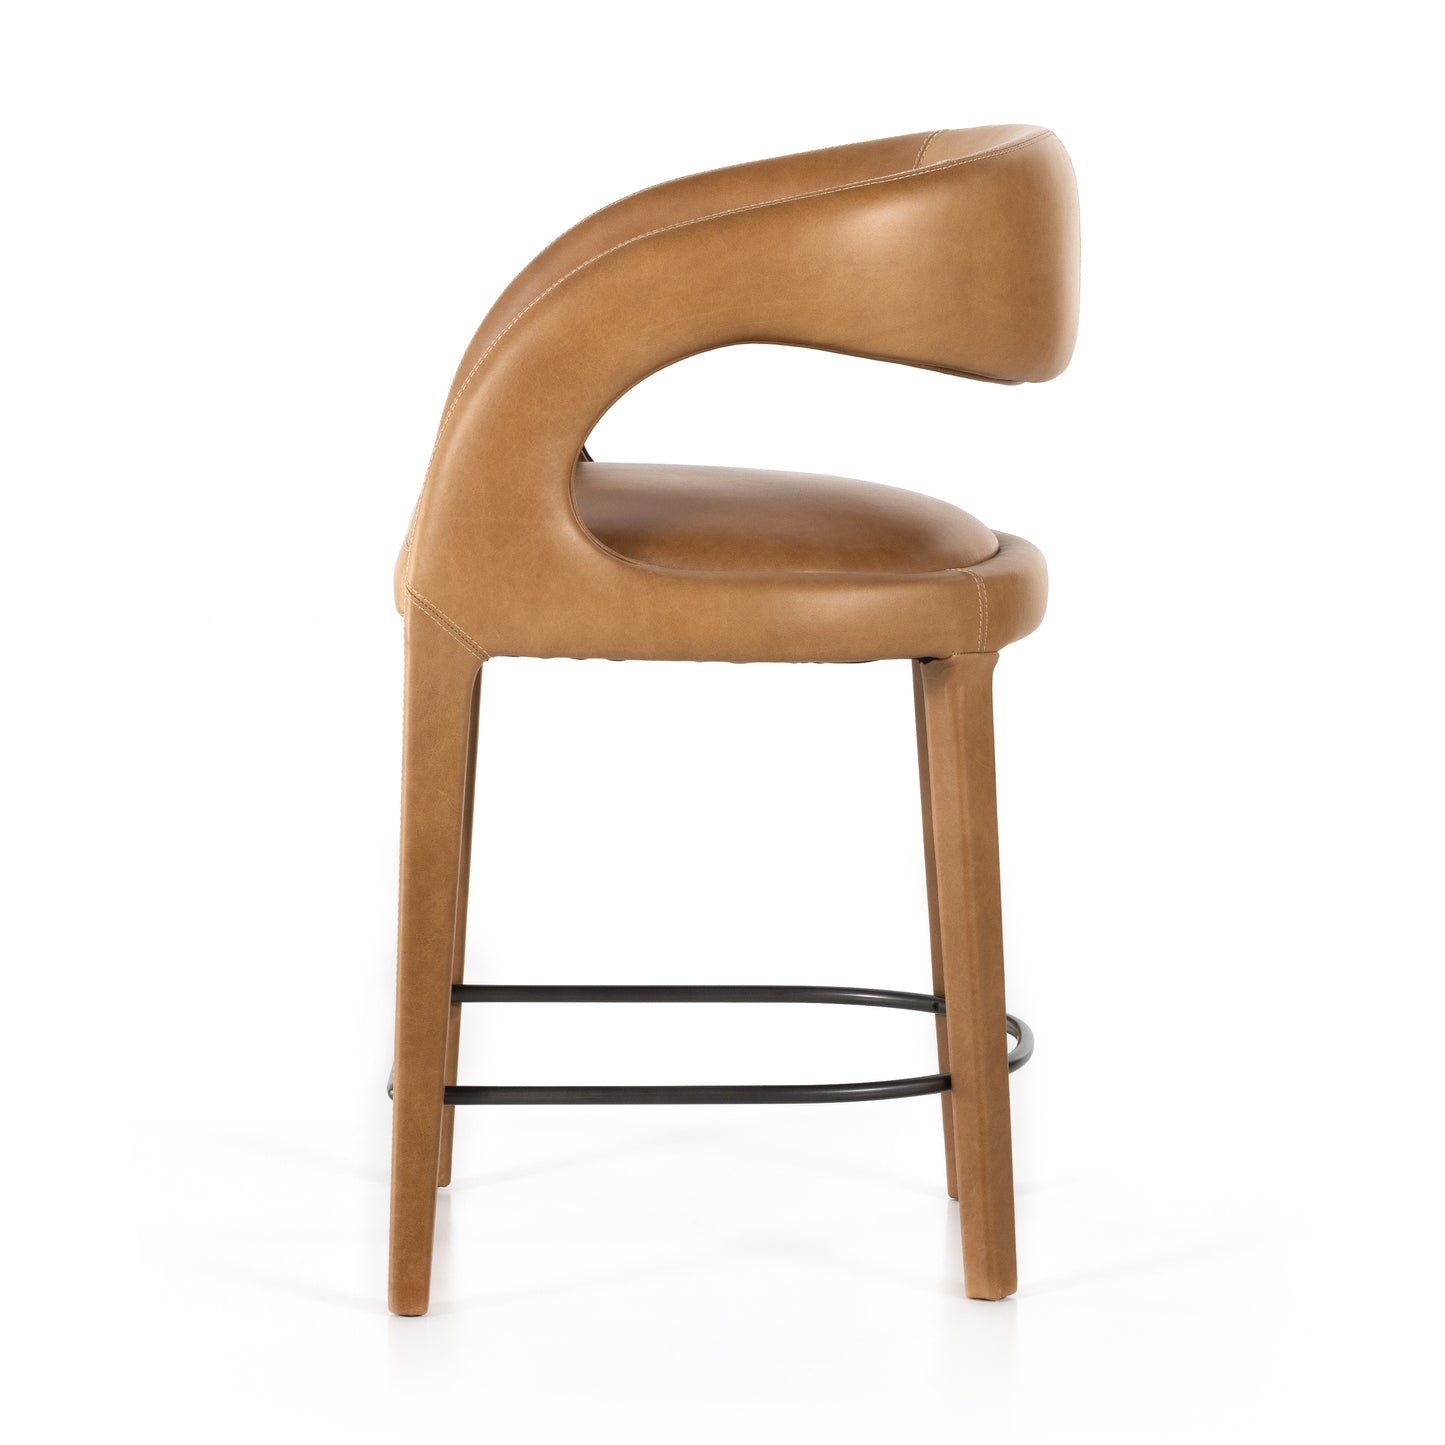 Load image into Gallery viewer, Hawkins Stool BAR AND COUNTER STOOL Four Hands     Four Hands, Burke Decor, Mid Century Modern Furniture, Old Bones Furniture Company, Old Bones Co, Modern Mid Century, Designer Furniture, https://www.oldbonesco.com/
